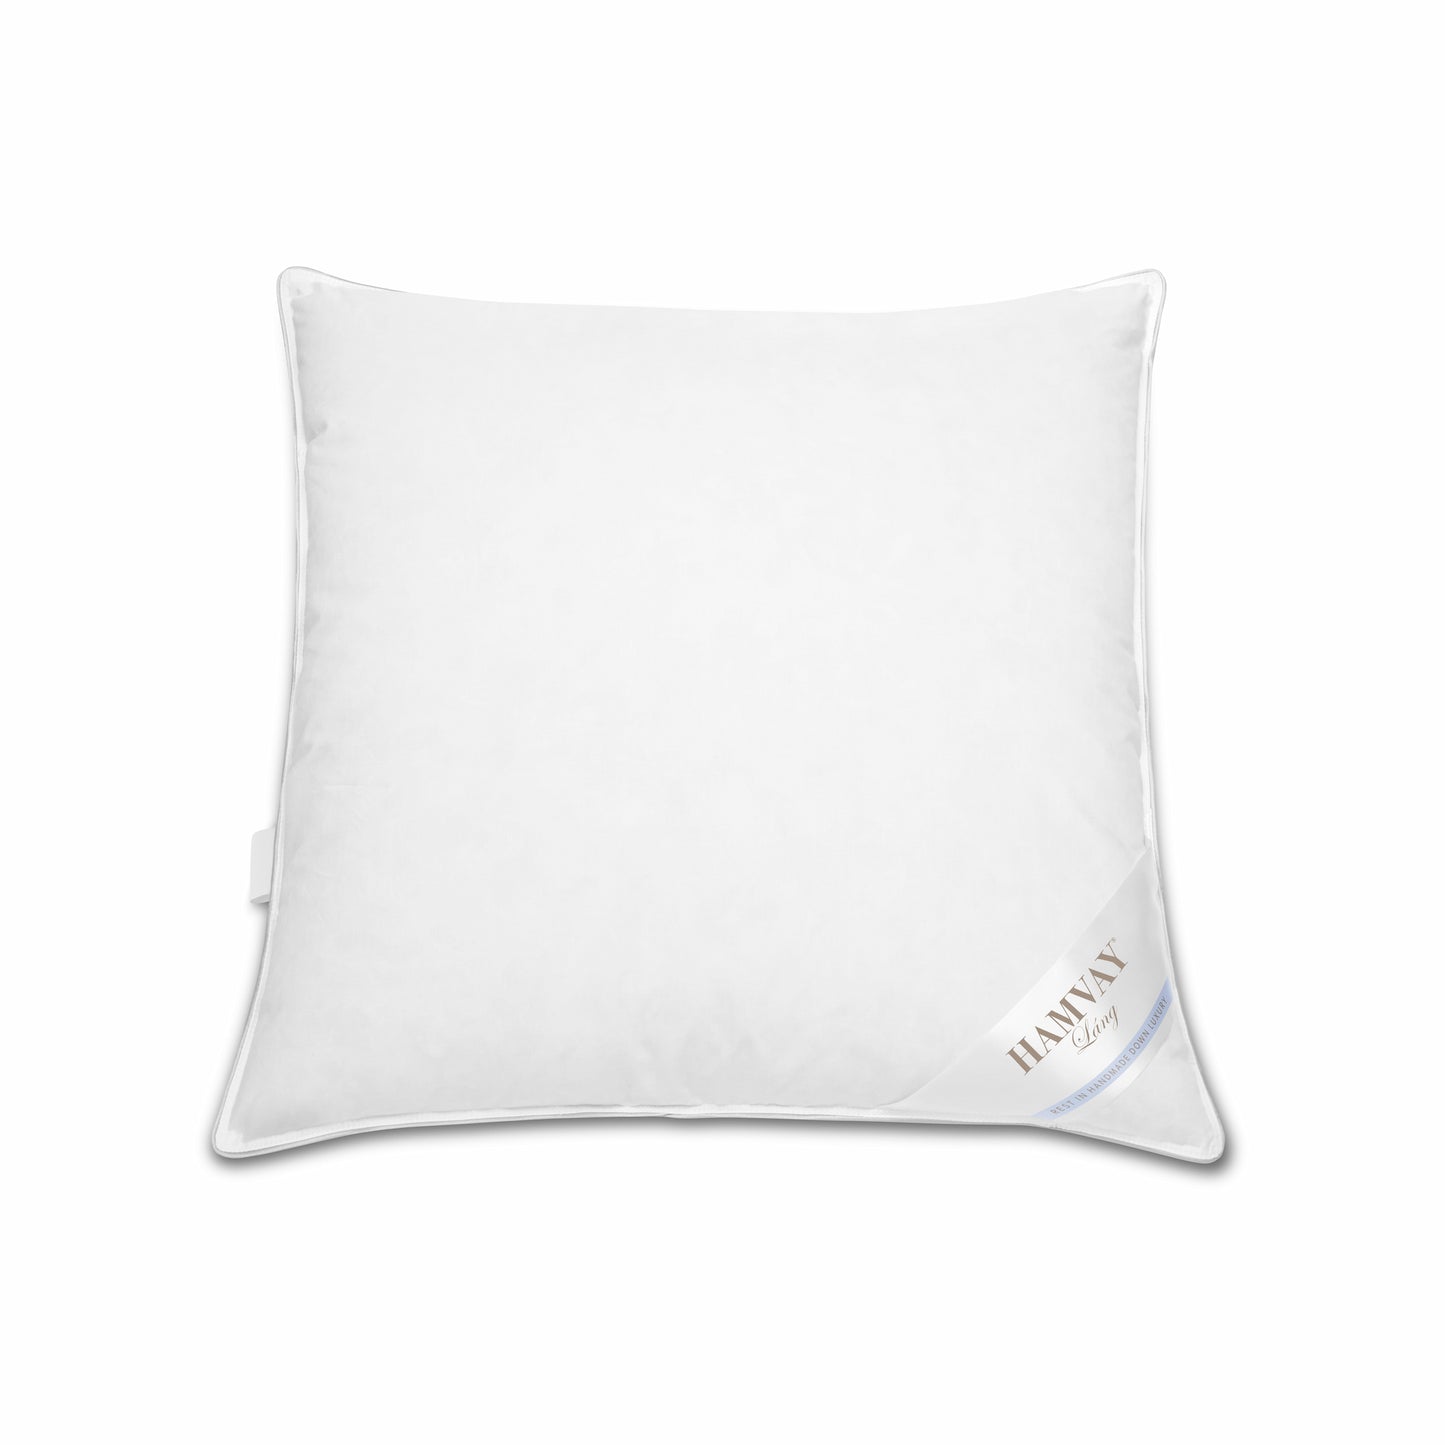 APSMILE Goose Down Feather Throw Pillow Inserts 2 Pack - 16x16 Euro Square Decorative Pillow Inserts for Bed, Sofa, Couch, White